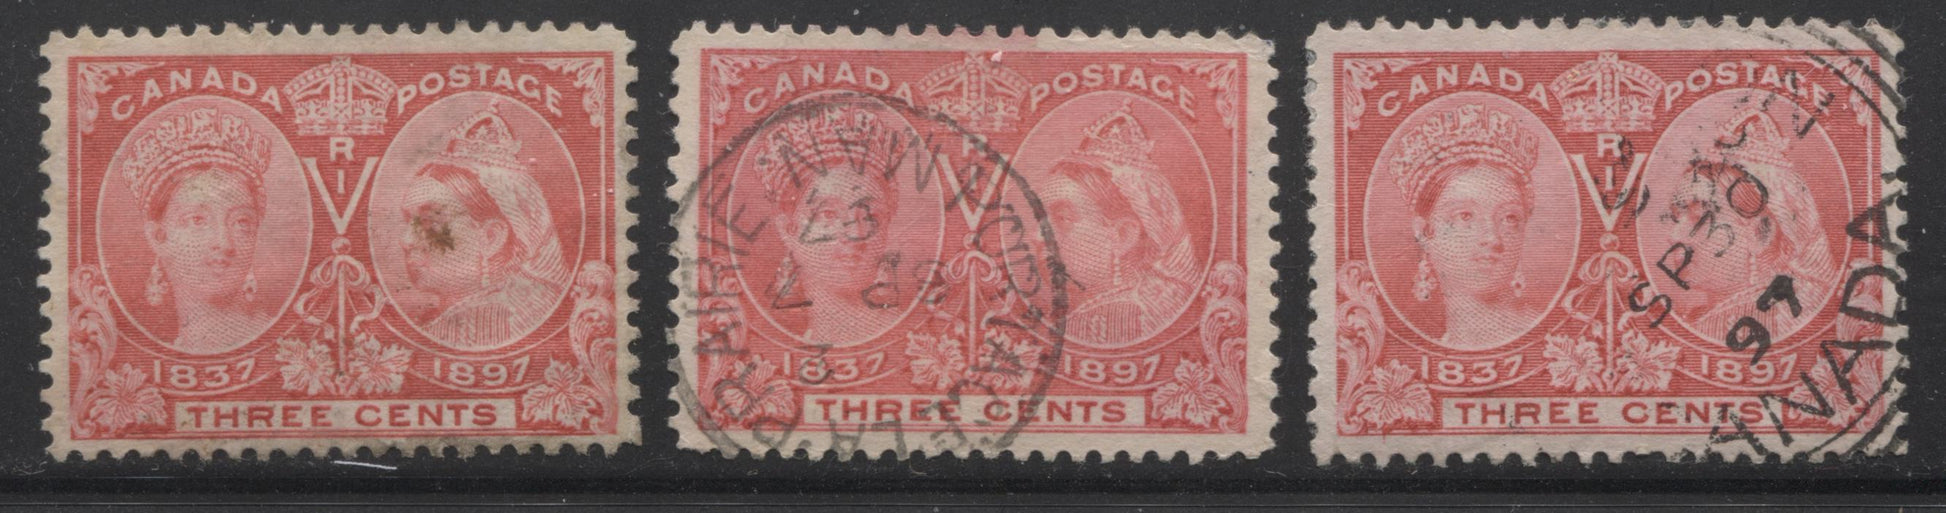 Canada #53 3c Bright Rose Queen Victoria, 1897 Diamond Jubilee Issue, Three Very Fine Used Examples, Each in a Slightly Different Shade Brixton Chrome 